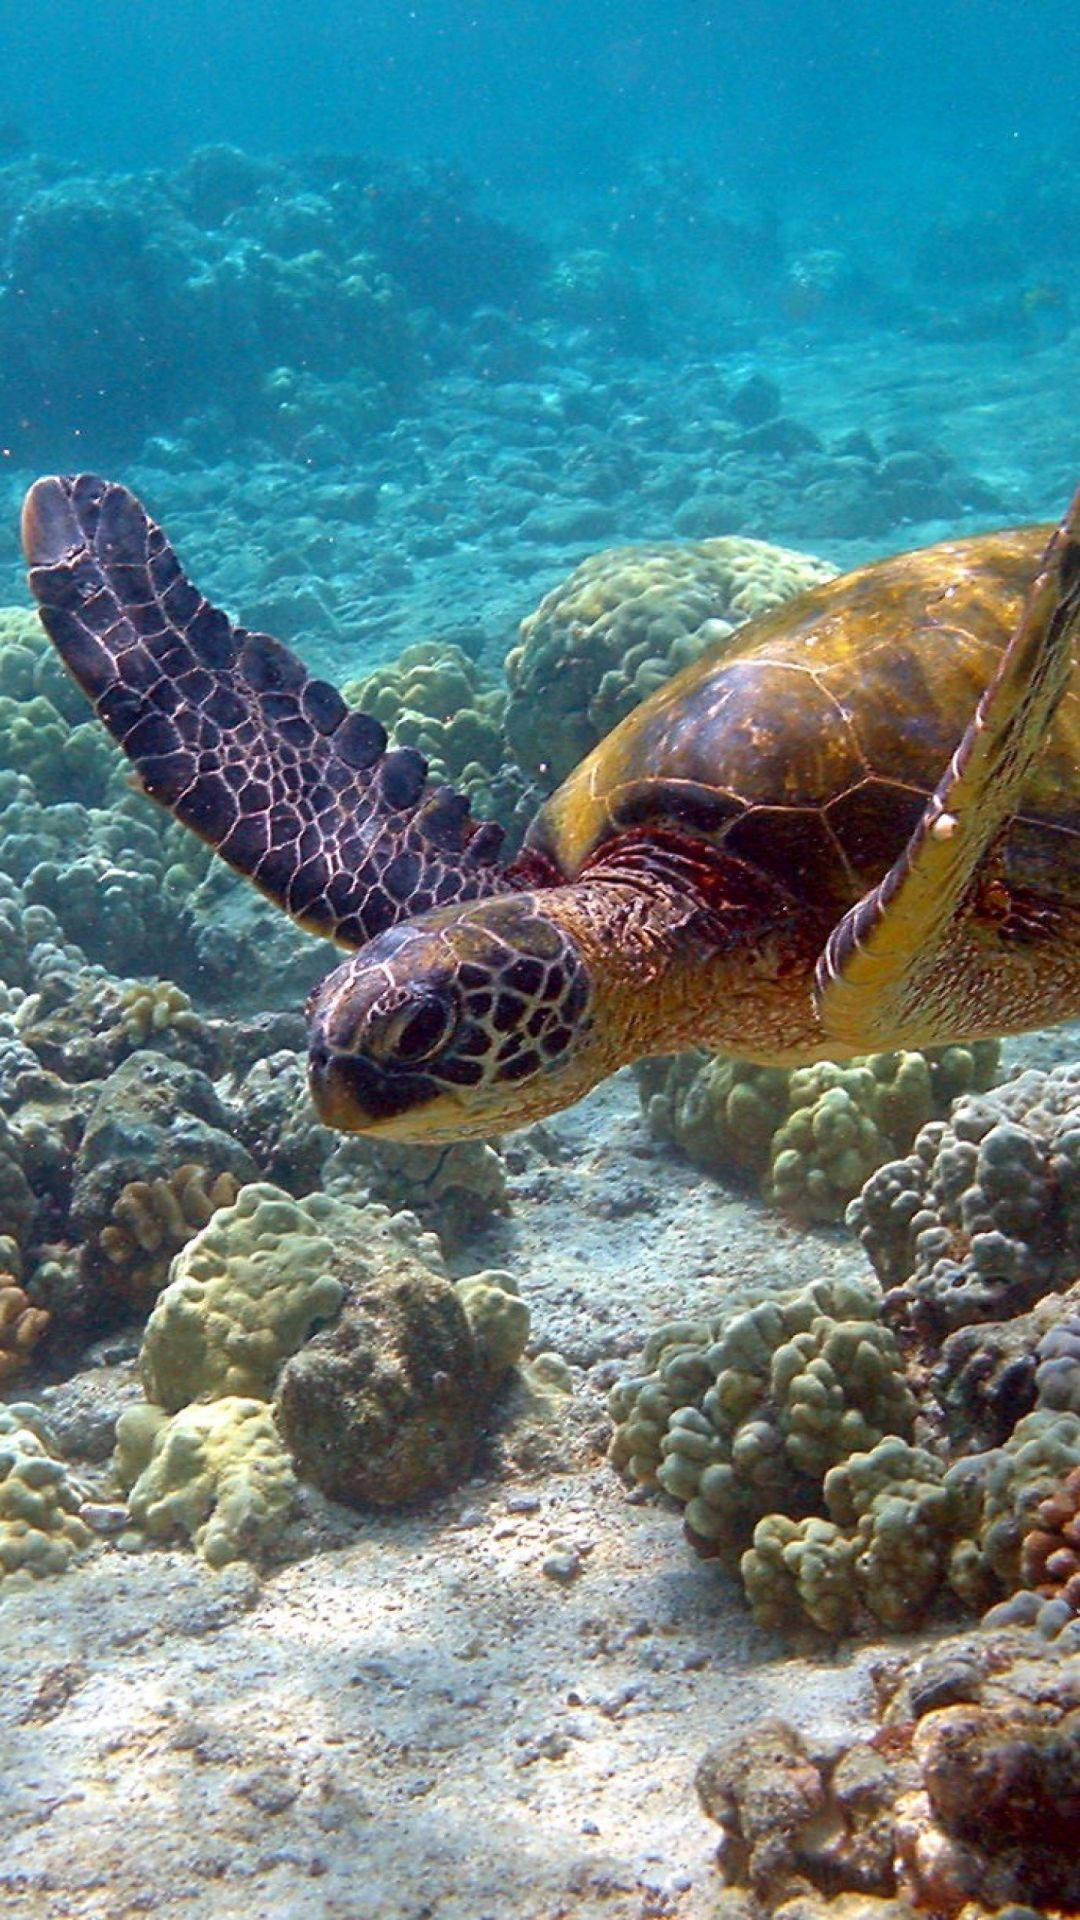 Get Lost in Nature with the Sea Turtle iPhone Wallpaper